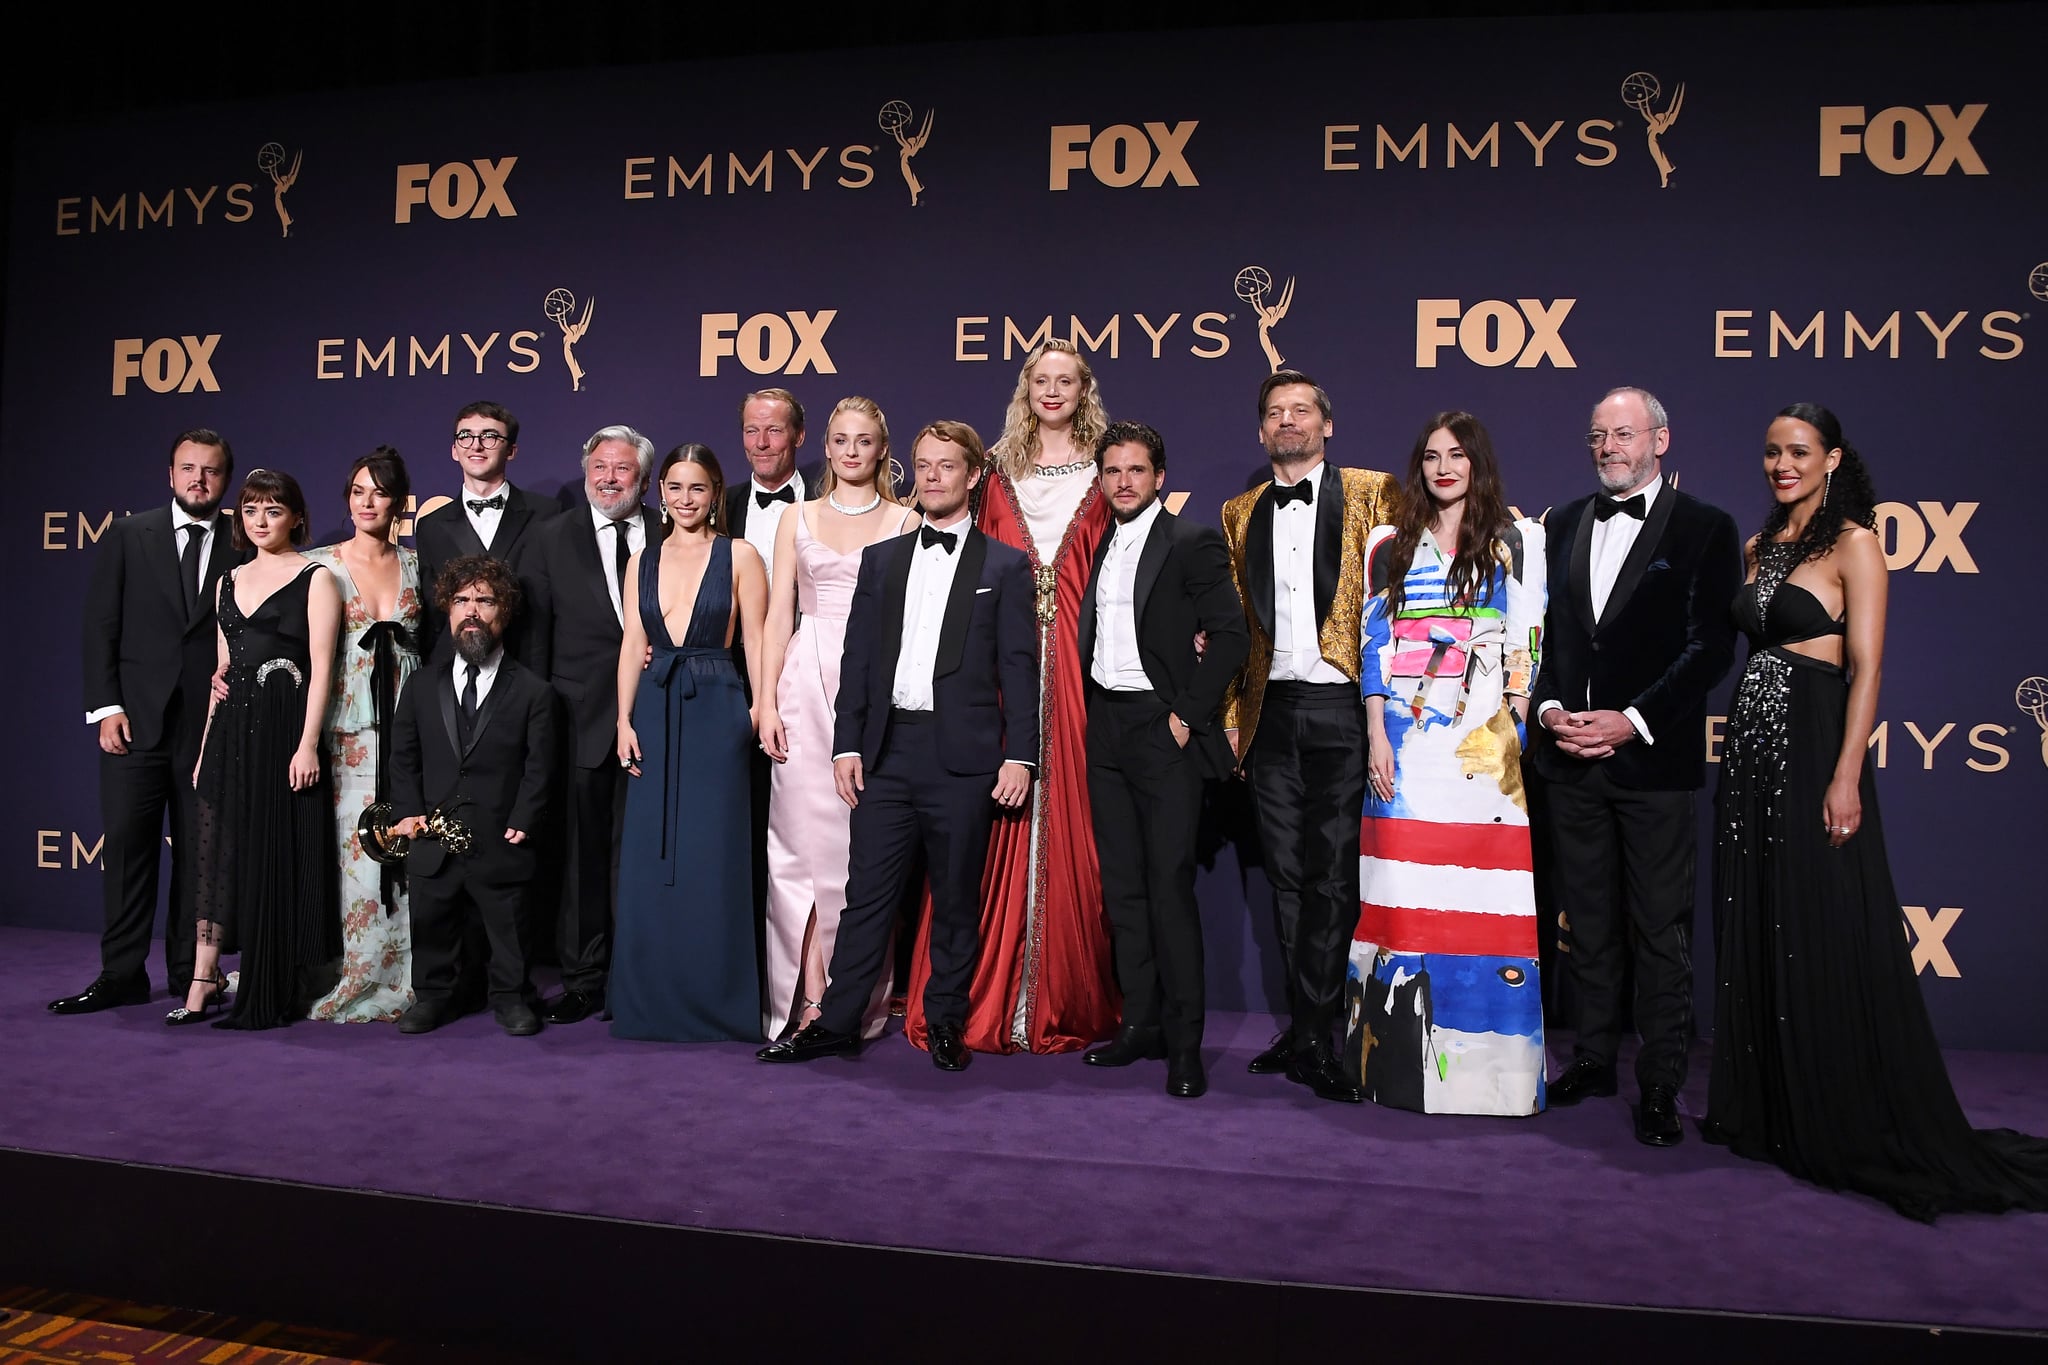 LOS ANGELES, CALIFORNIA - SEPTEMBER 22: Cast and crew of 'Game of Thrones' pose with awards for Outstanding Drama Series in the press room during the 71st Emmy Awards at Microsoft Theater on September 22, 2019 in Los Angeles, California. (Photo by Steve Granitz/WireImage)